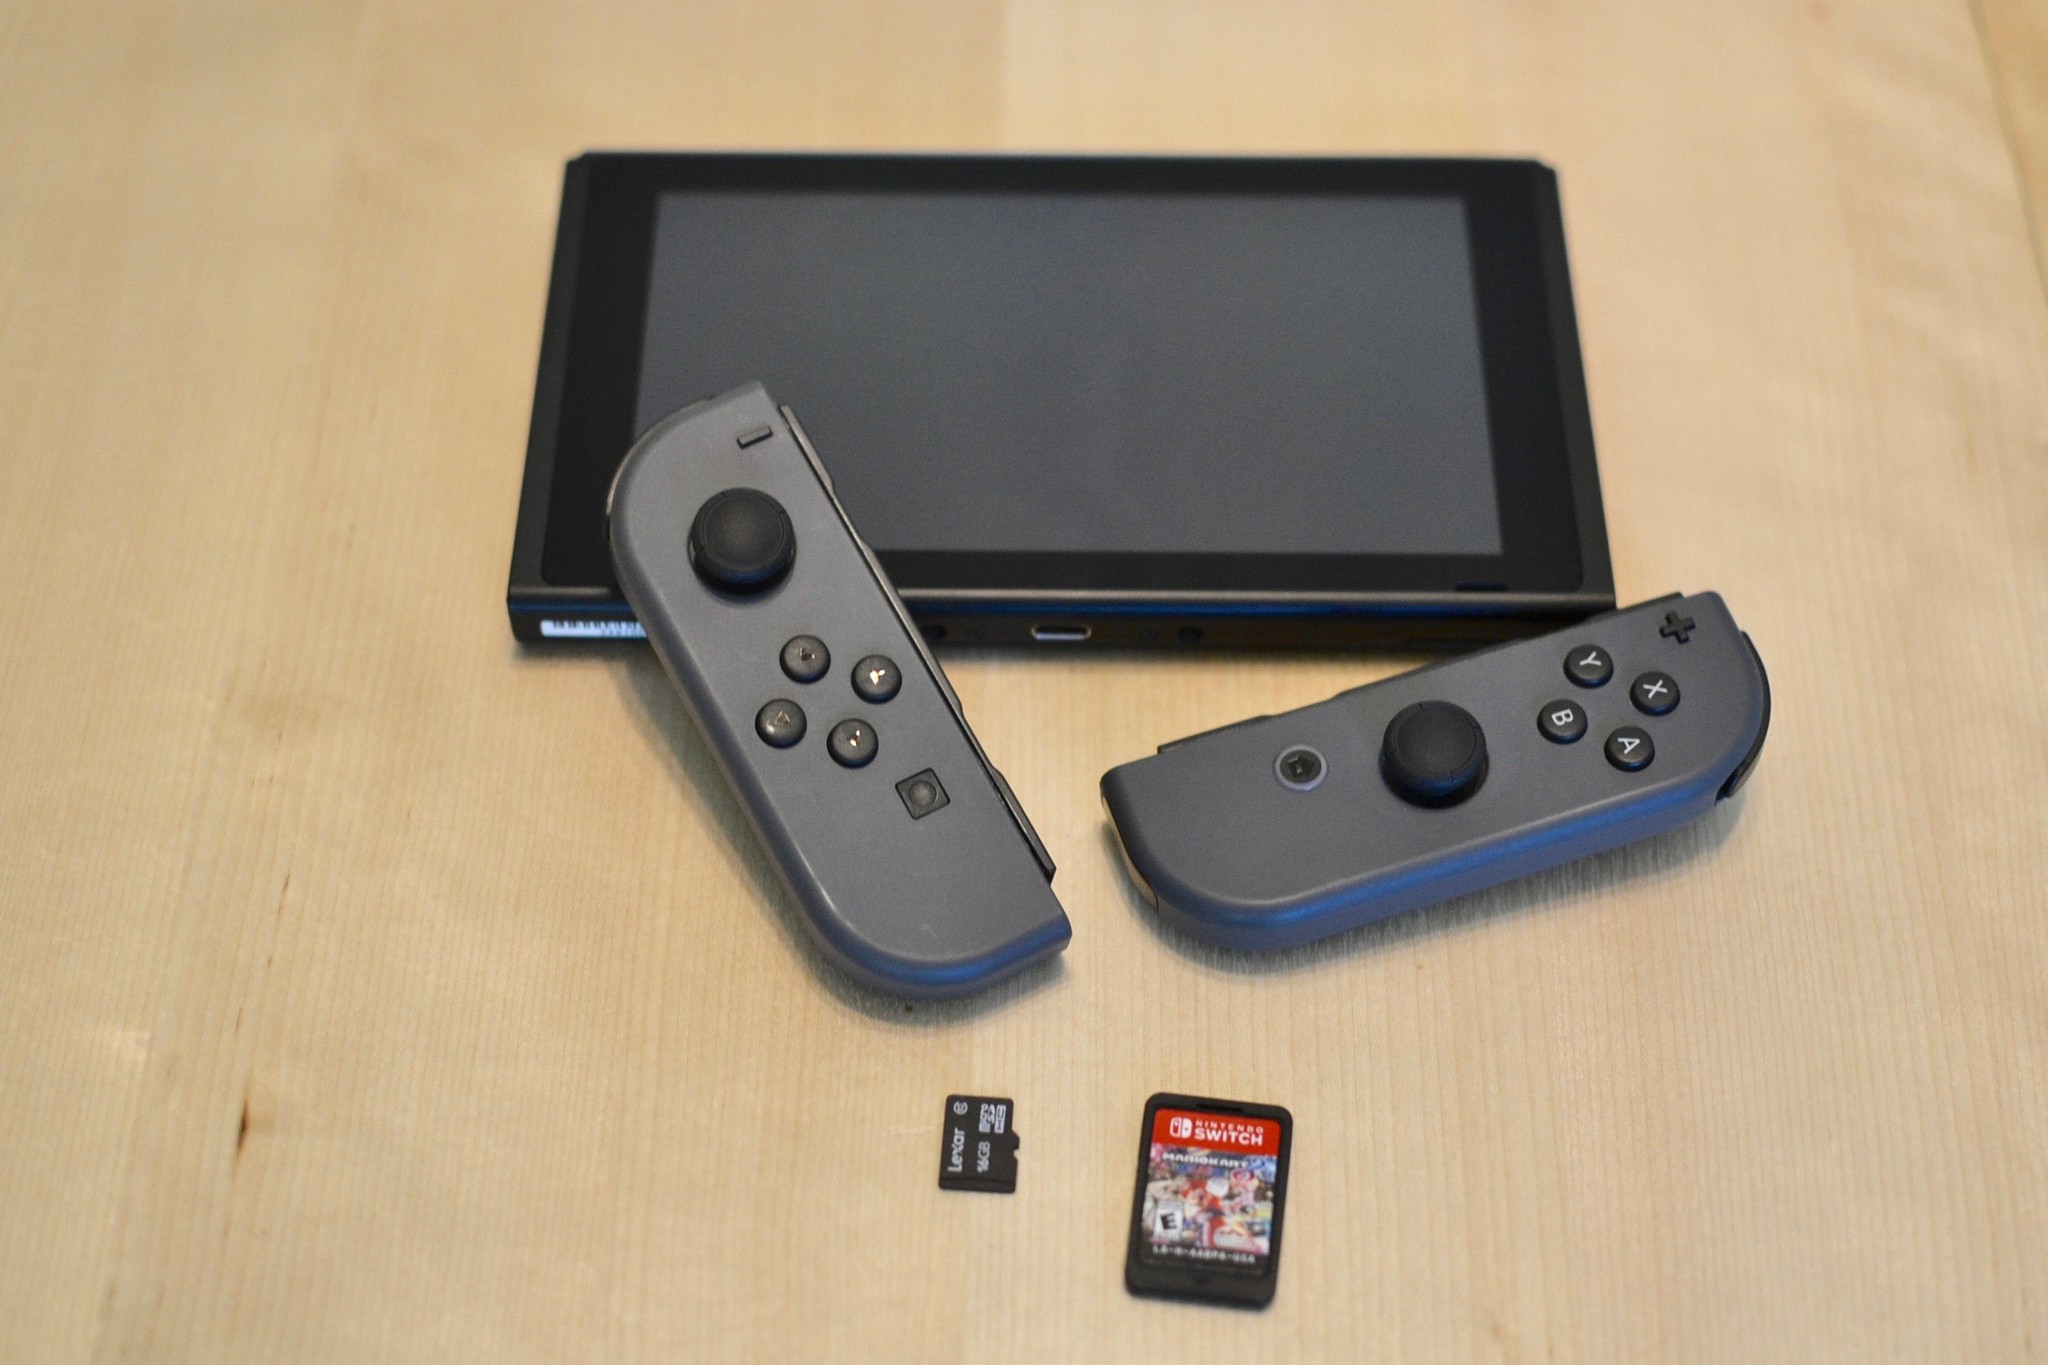 Power off your Switch, remove the card and cartridge, disconnect the Joy-Cons